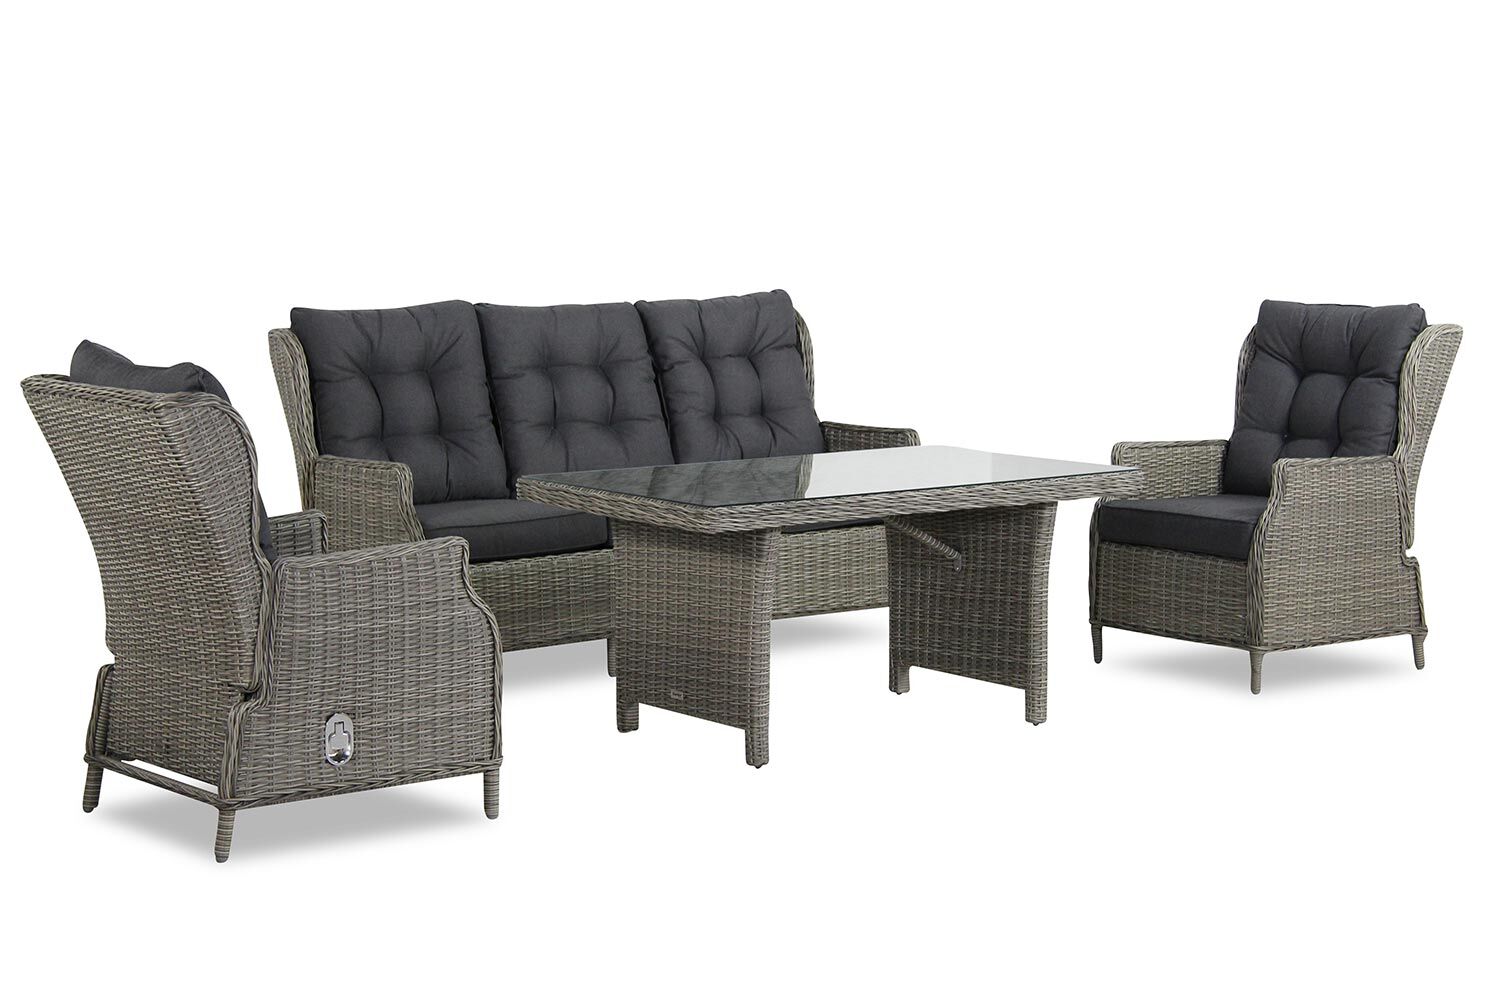 Garden Collections New Castle loungeset